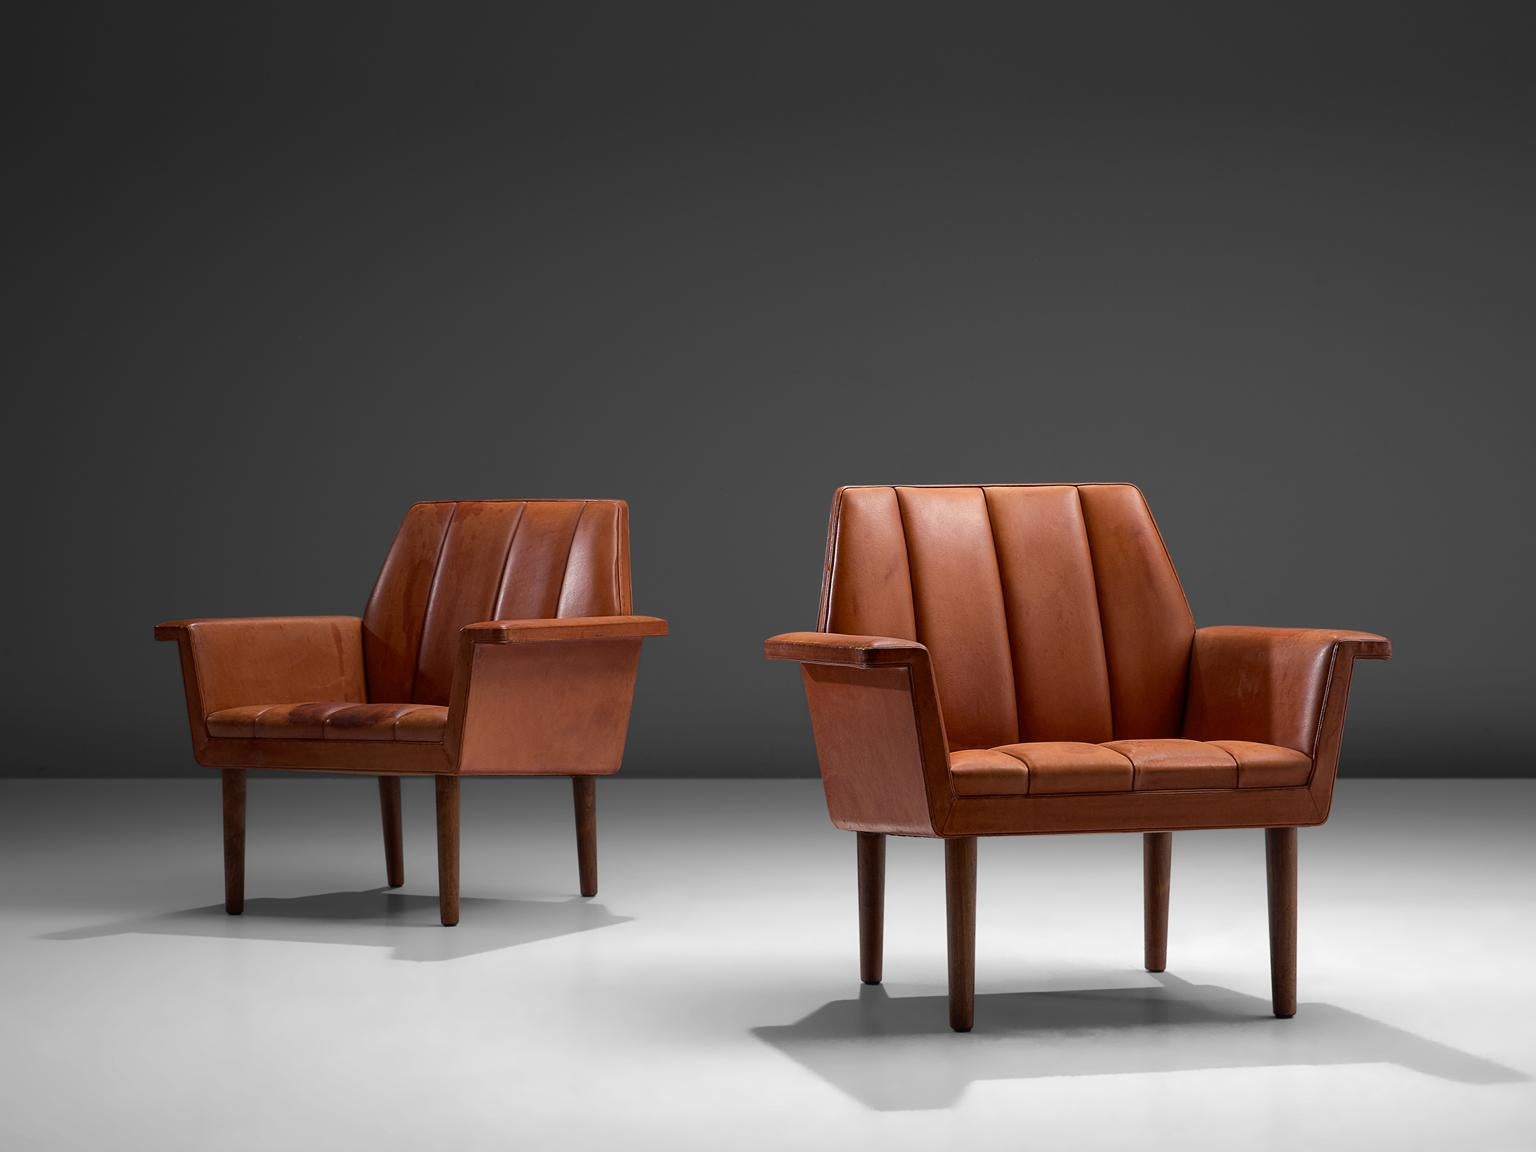 Helge Vestergaard Jensen for Peder Pedersen, pair of armchairs, cognac leather, wood, Denmark, 1960

Pair of terracotta-red leather armchairs that stand high on wooden legs, these chairs have a stately appearance. The seating is characterized by